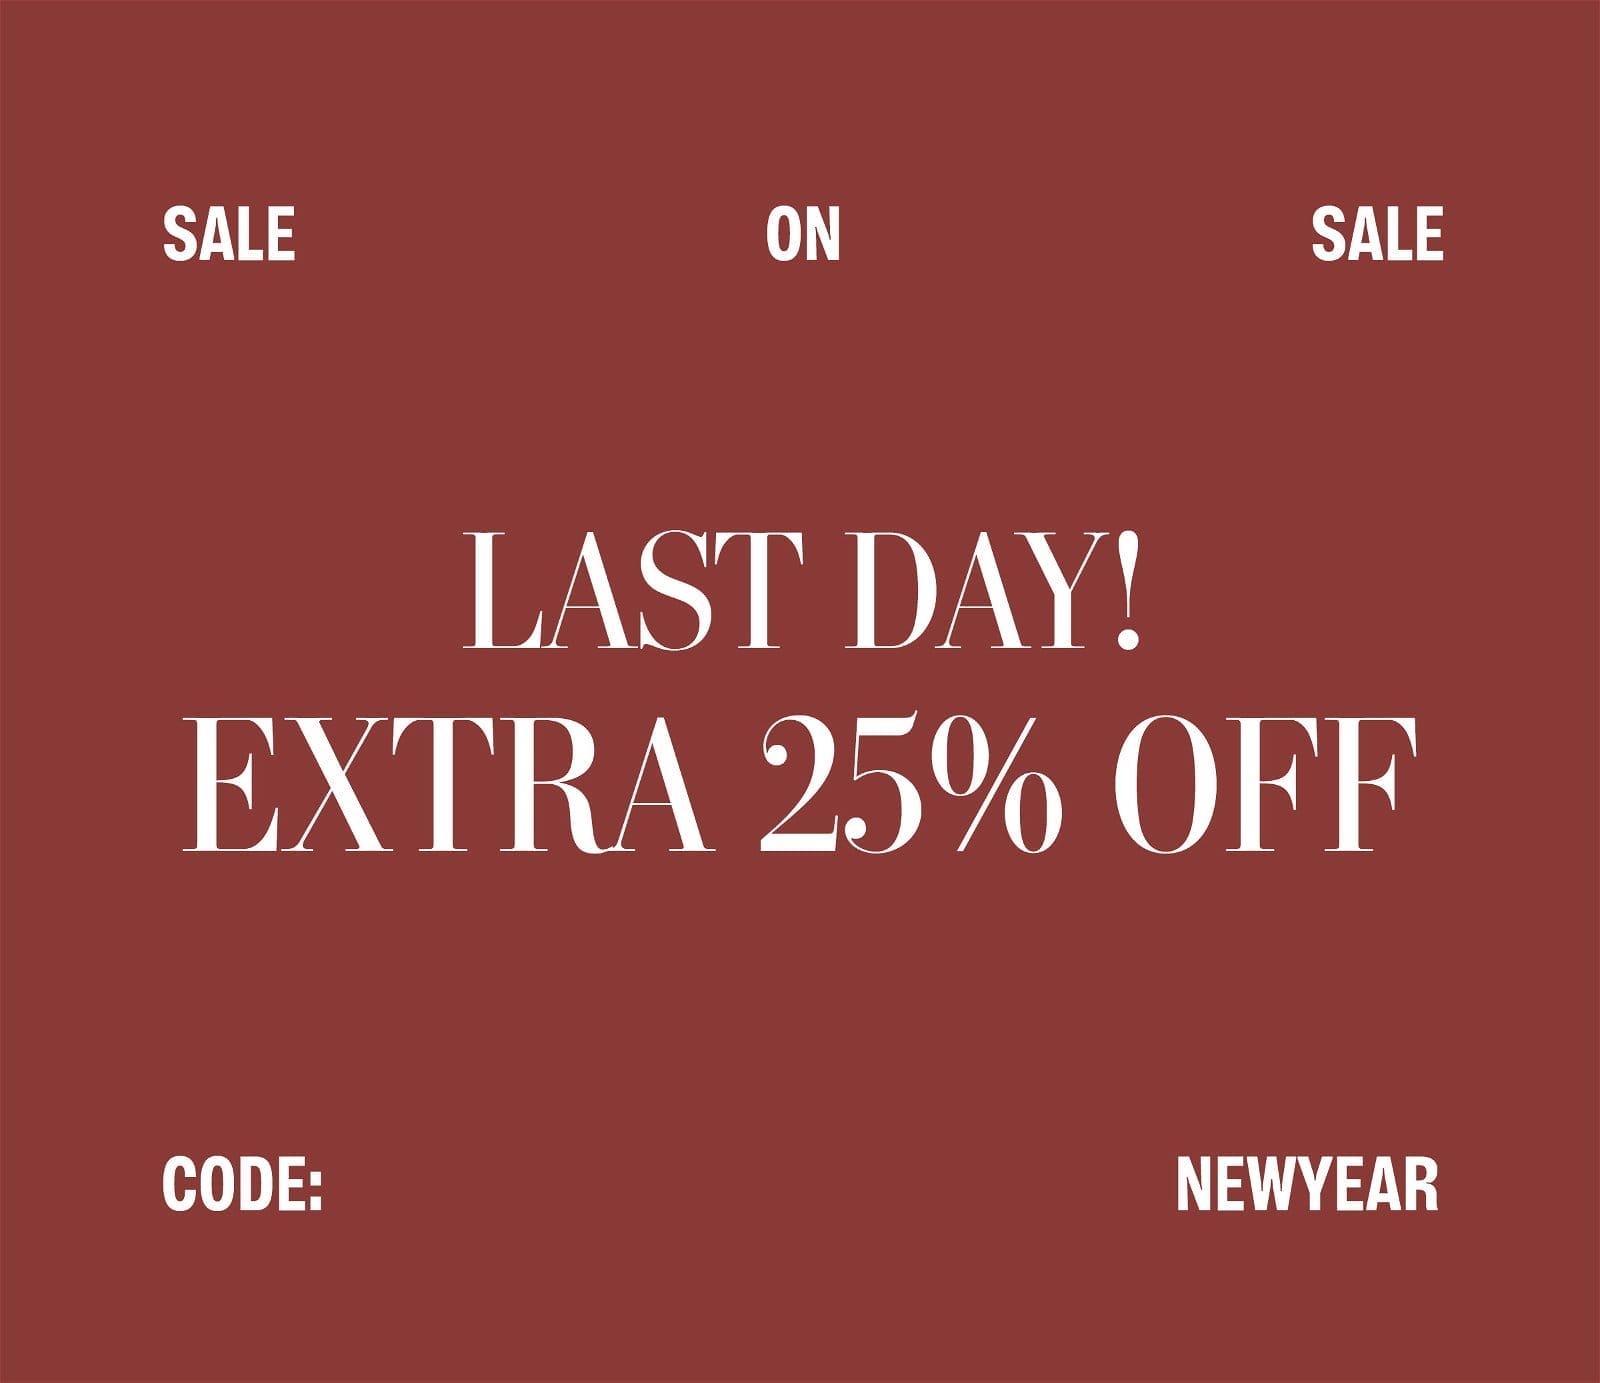 SALE ON SALE. LAST DAY! EXTRA 25% OFF. CODE: NEWYEAR